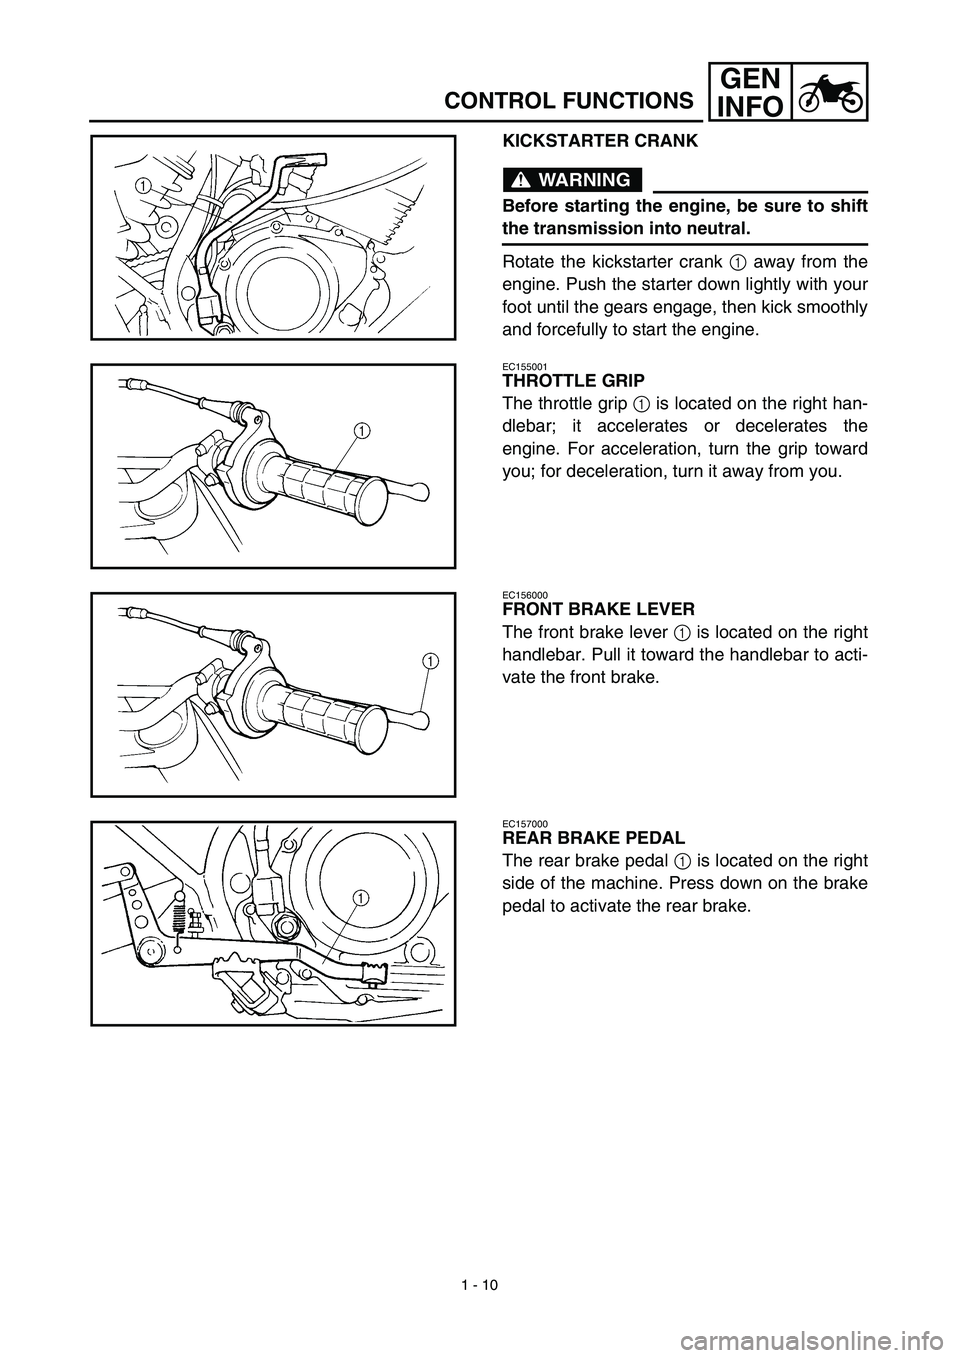 YAMAHA TTR125 2003  Owners Manual 1 - 10
GEN
INFO
CONTROL FUNCTIONS
KICKSTARTER CRANK
WARNING
Before starting the engine, be sure to shift
the transmission into neutral.
Rotate the kickstarter crank 1 away from the
engine. Push the st